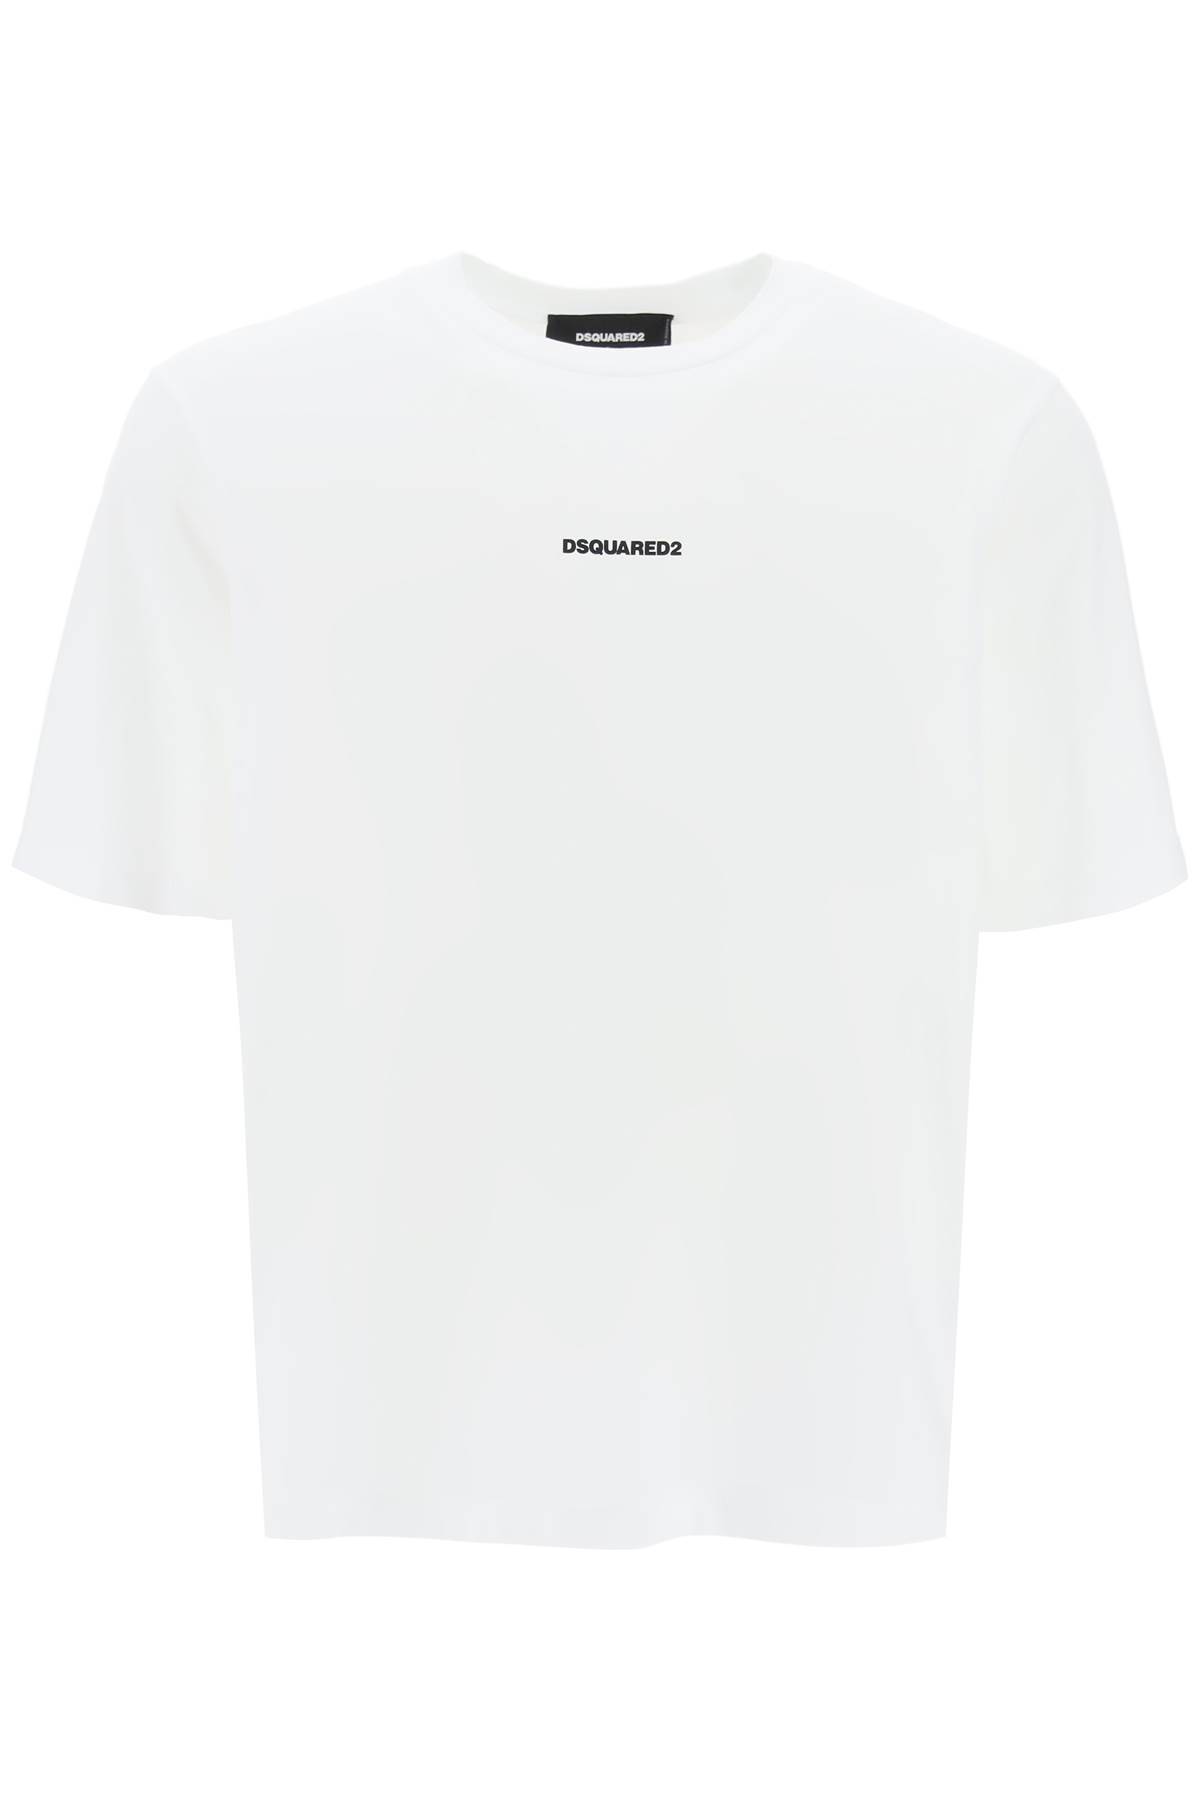 Dsquared2 DSQUARED2 slouch fit t-shirt with logo print